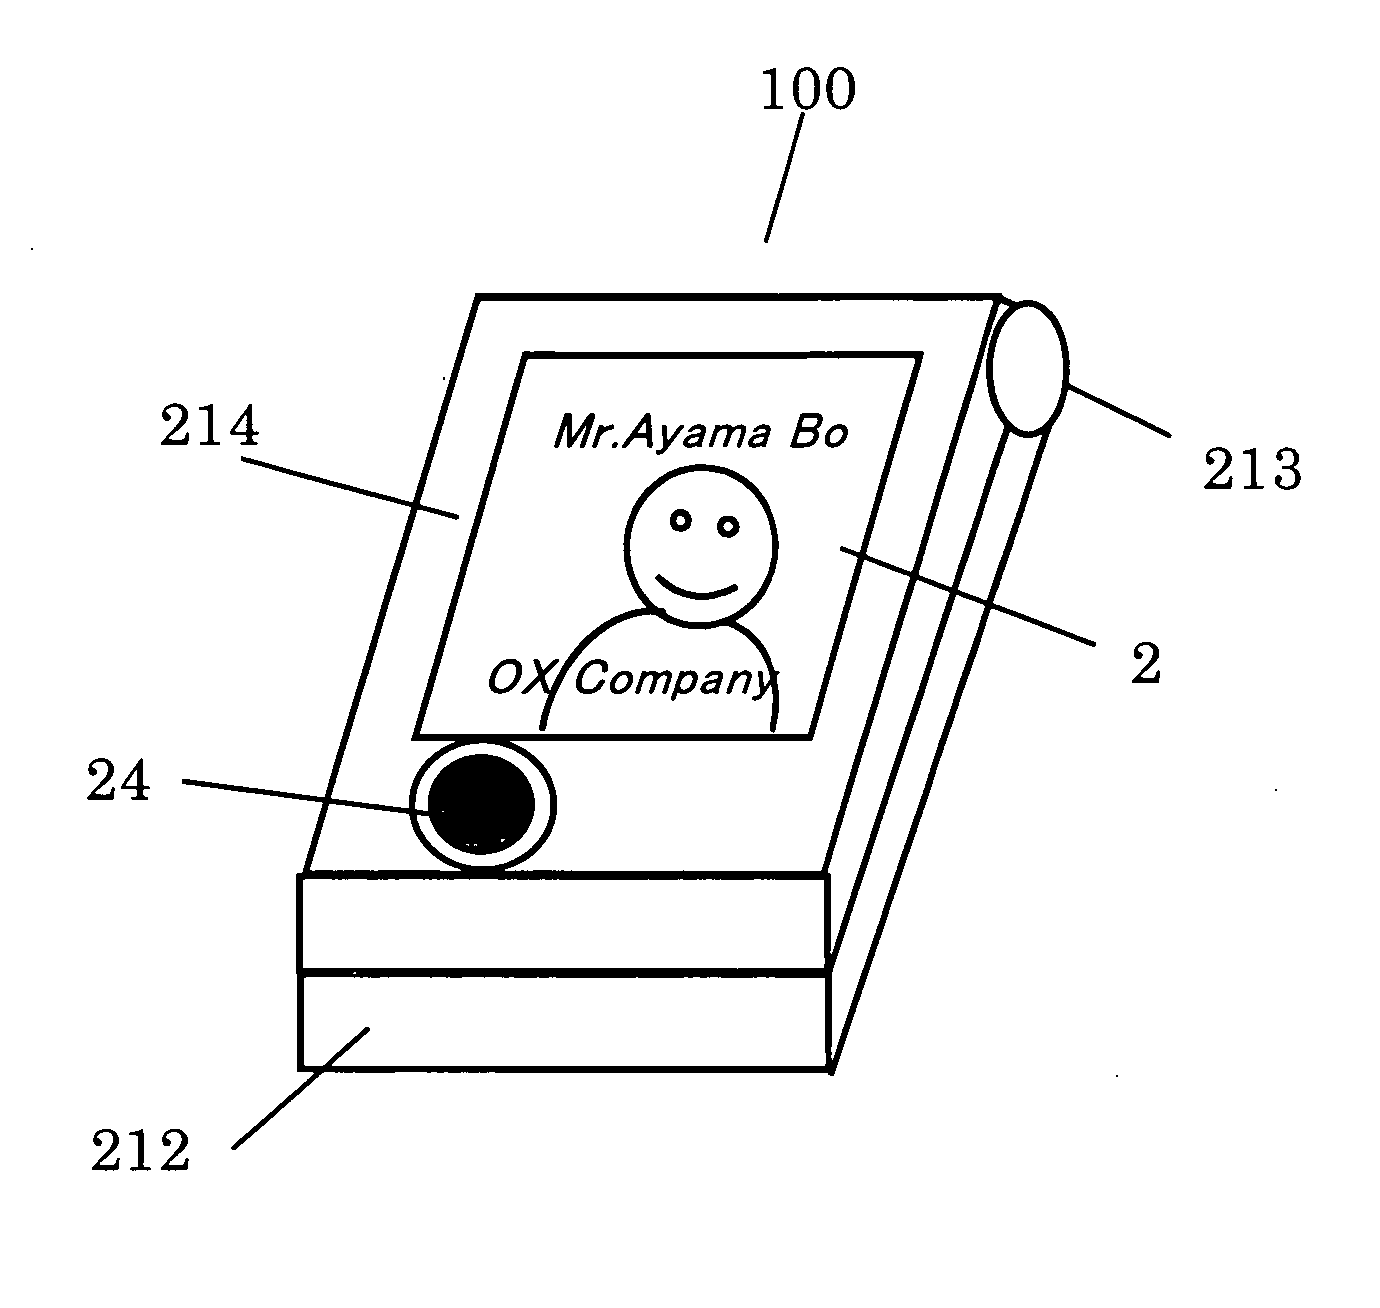 Liquid crystal display device, and portable telephone device using liquid crystal display device